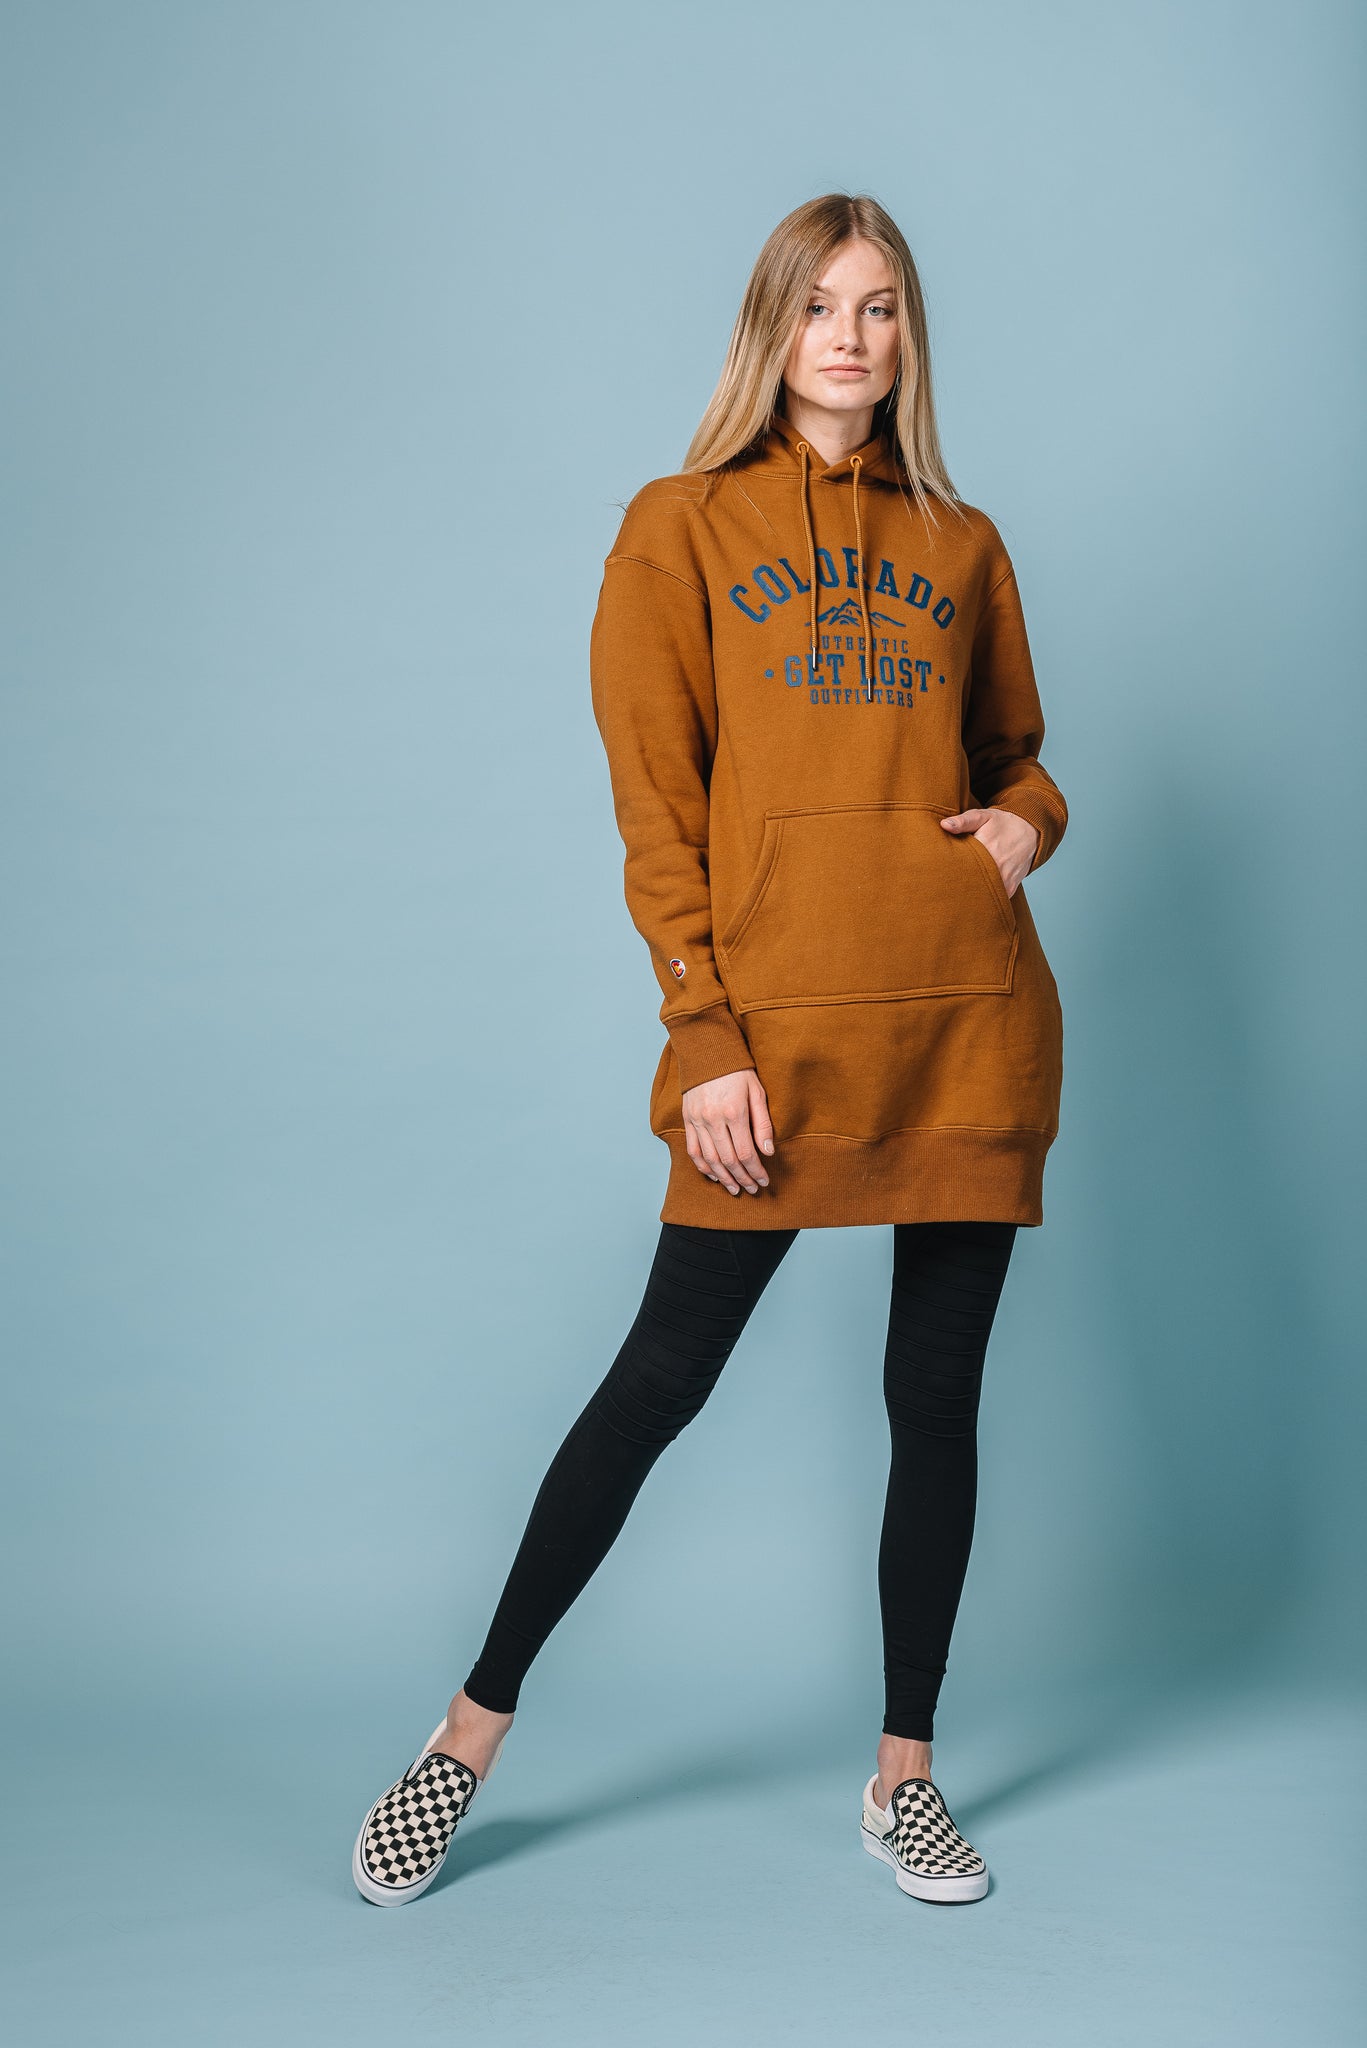 SWEATSHIRT DRESS TAWNY – Authentic GET LOST Outfitters